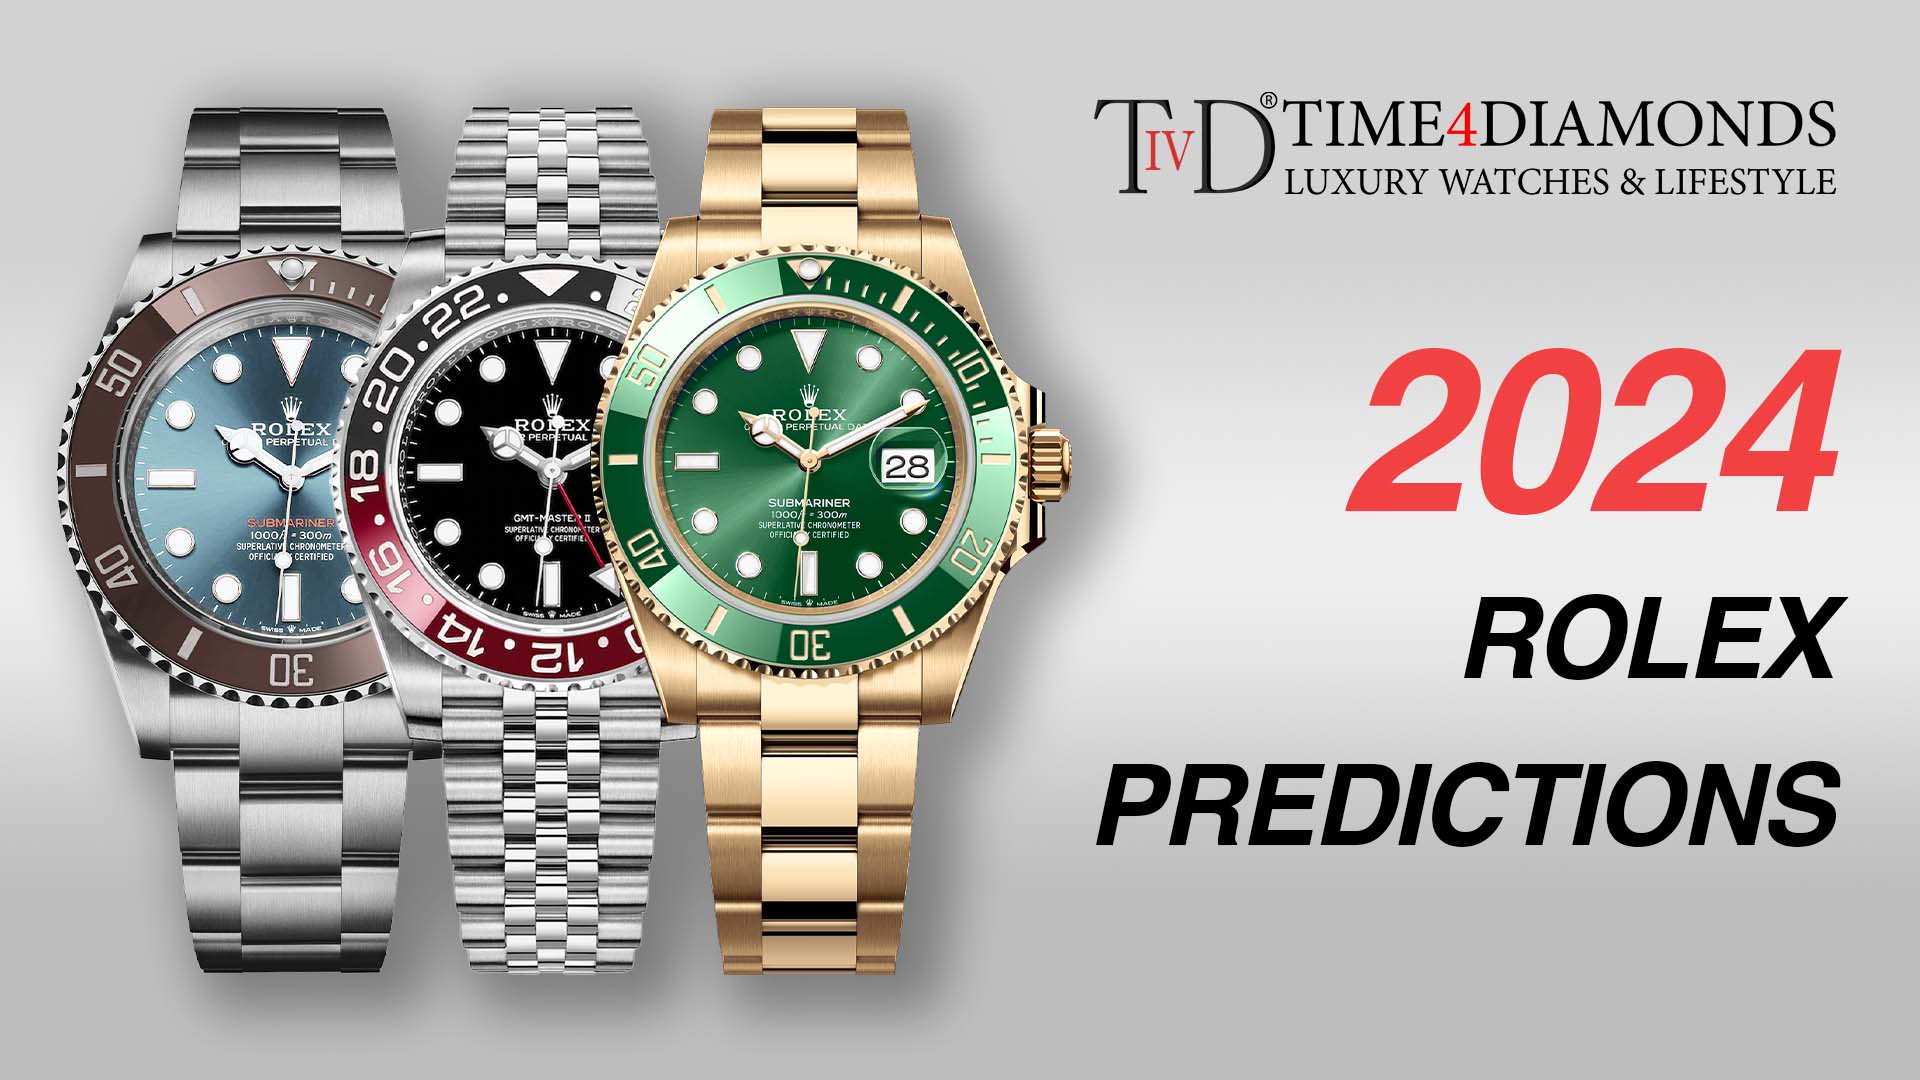 WHAT COULD ROLEX RELEASE IN 2024?